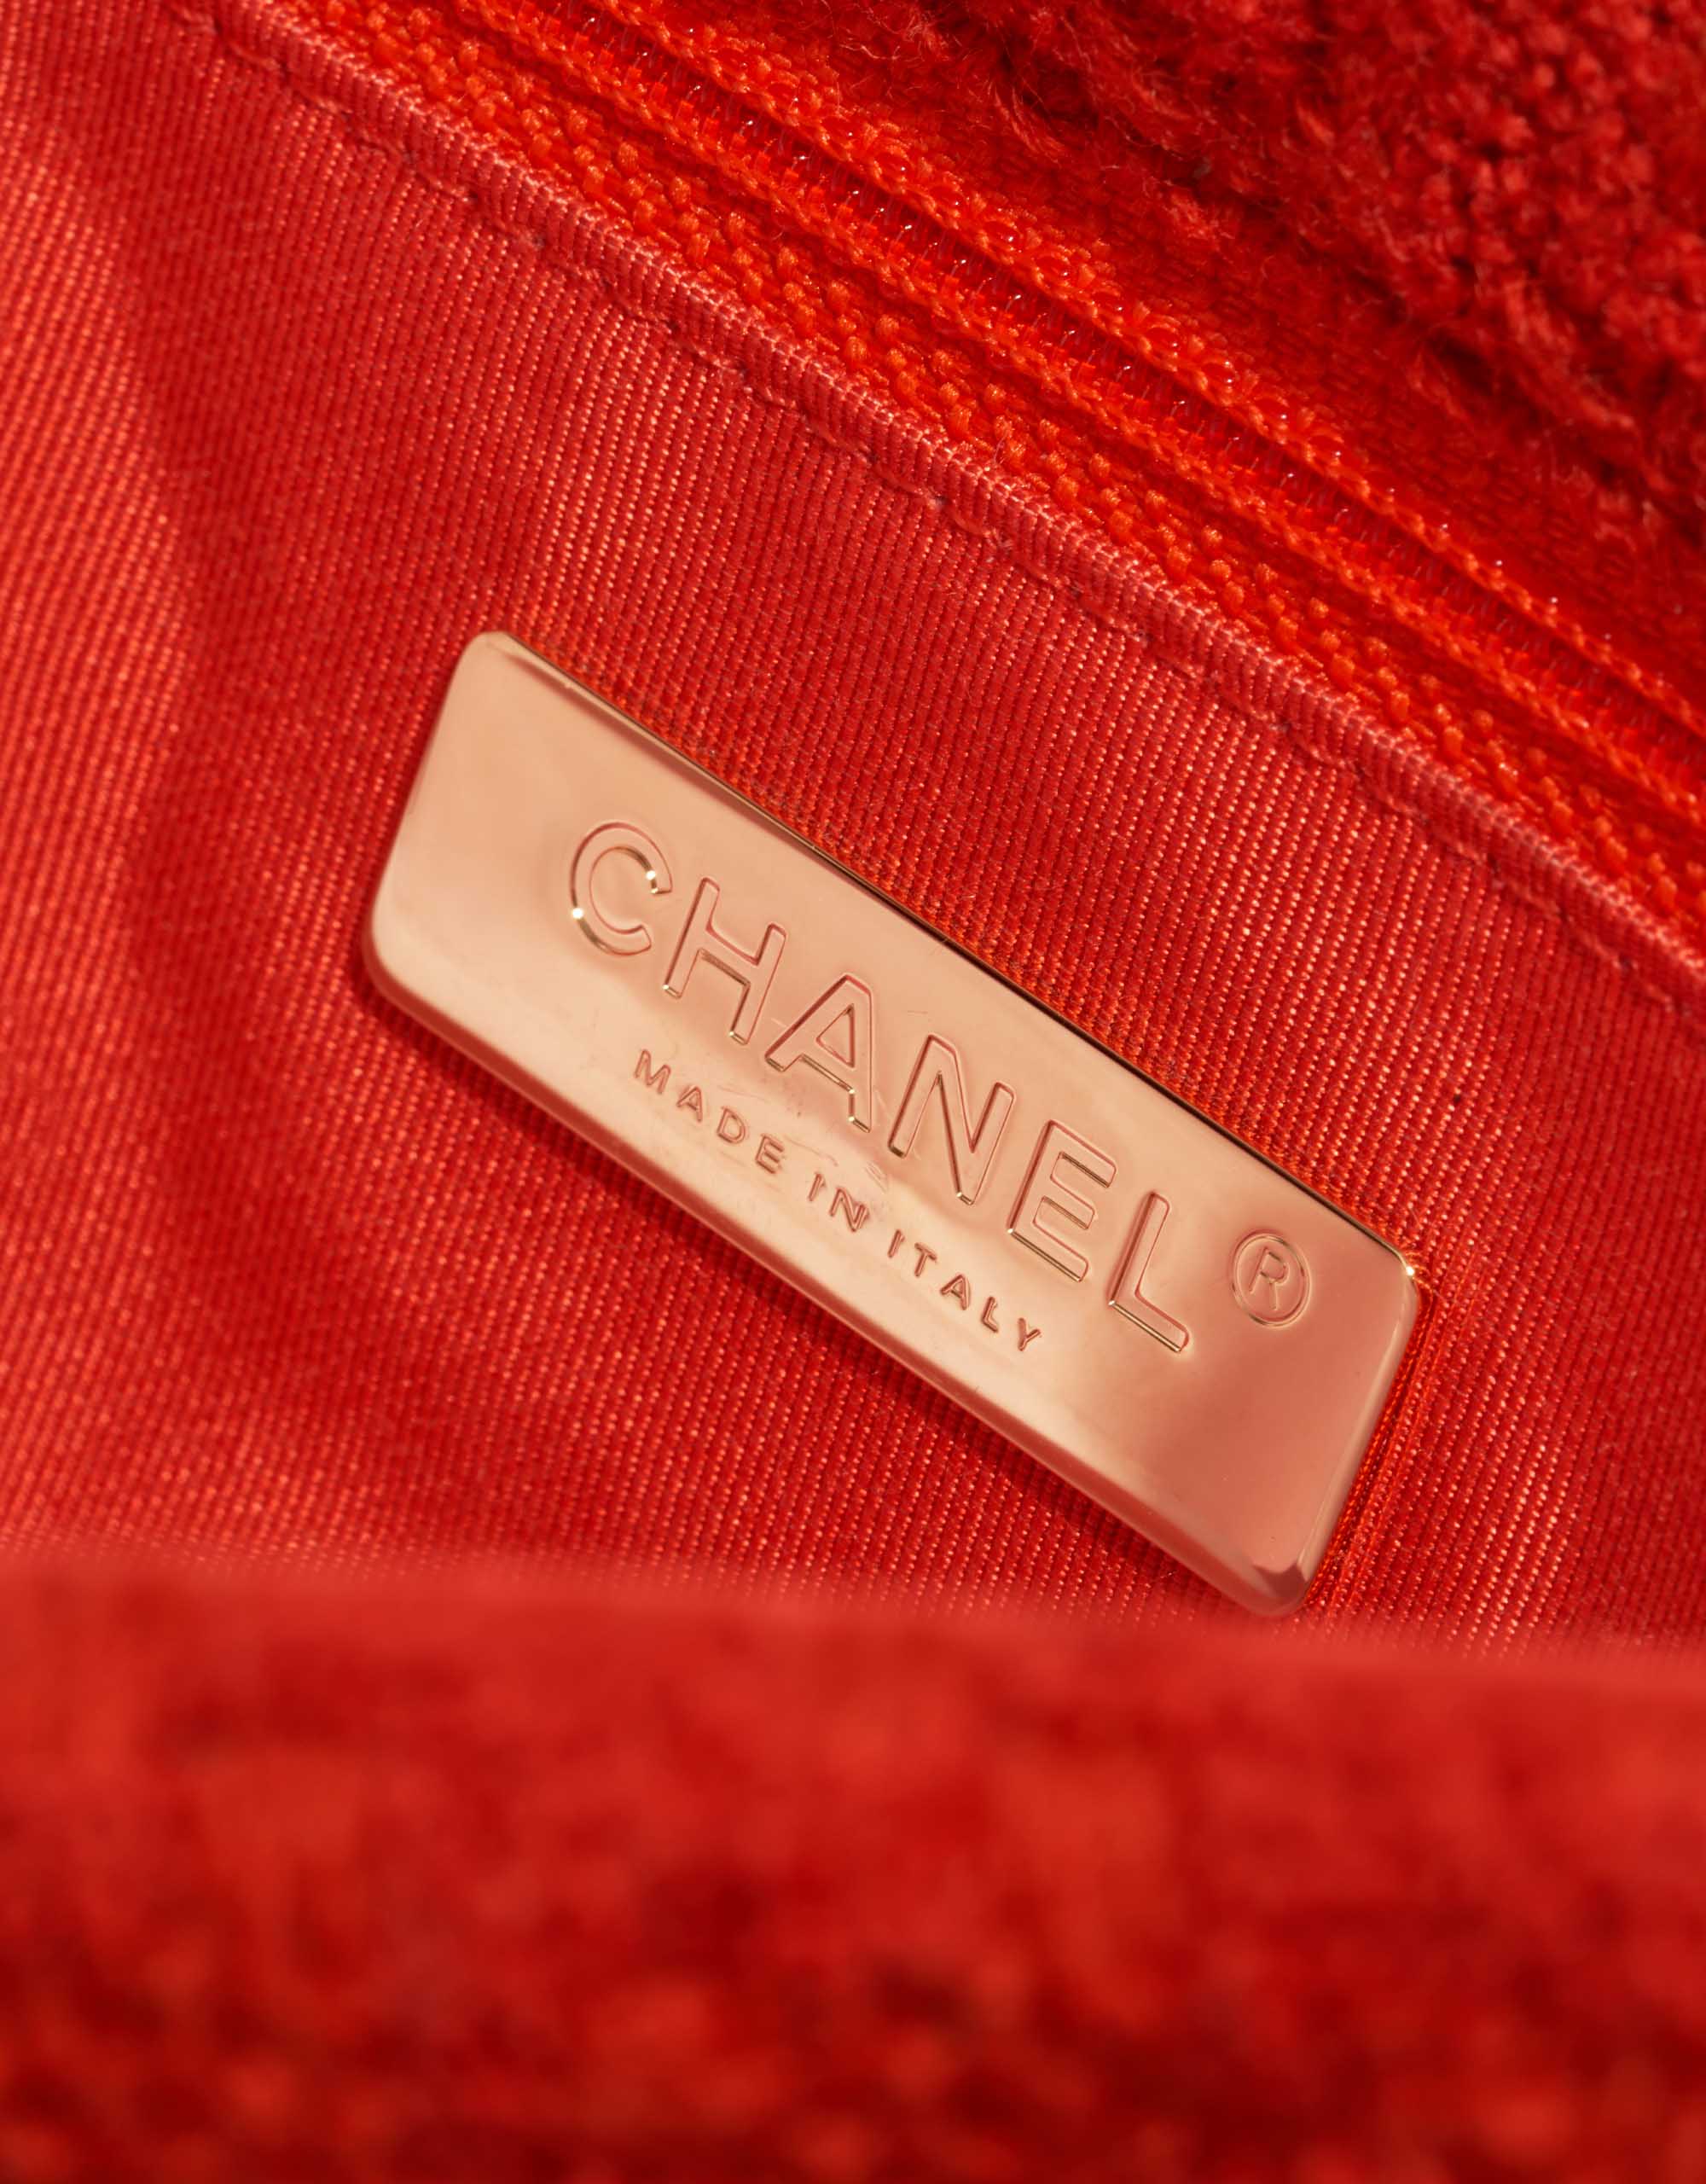 Pre-owned Chanel bag 19 Flap Bag Large Wool Red Red Logo | Sell your designer bag on Saclab.com